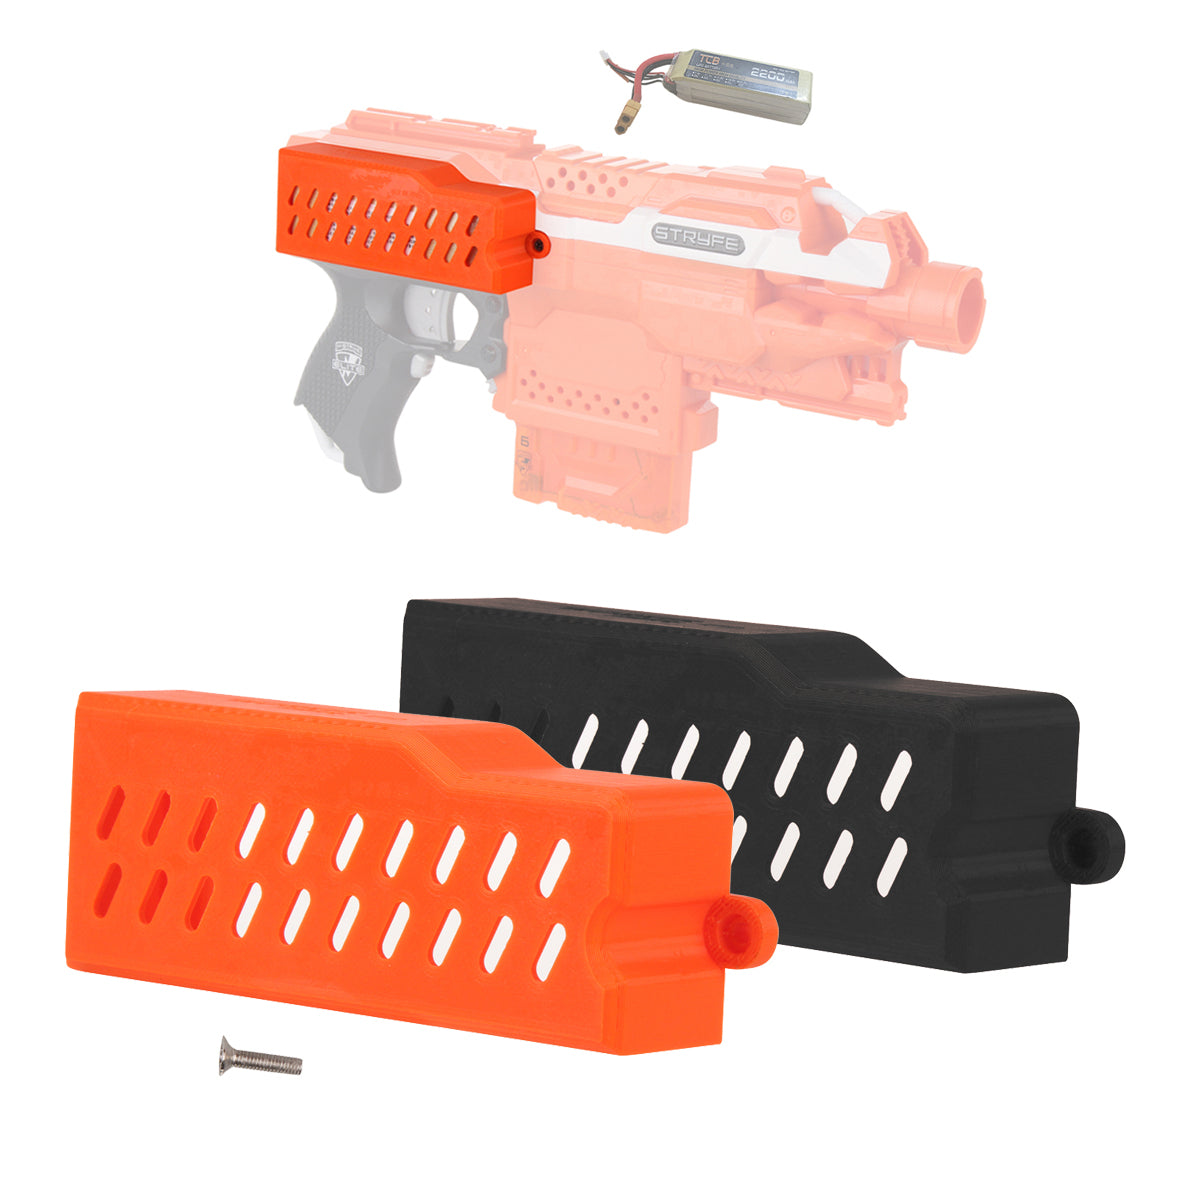 Worker Mod F10555 Extended LiPo Battery Cover Orange 3D Printed for Nerf Stryfe Modify Toy - BlasterMOD